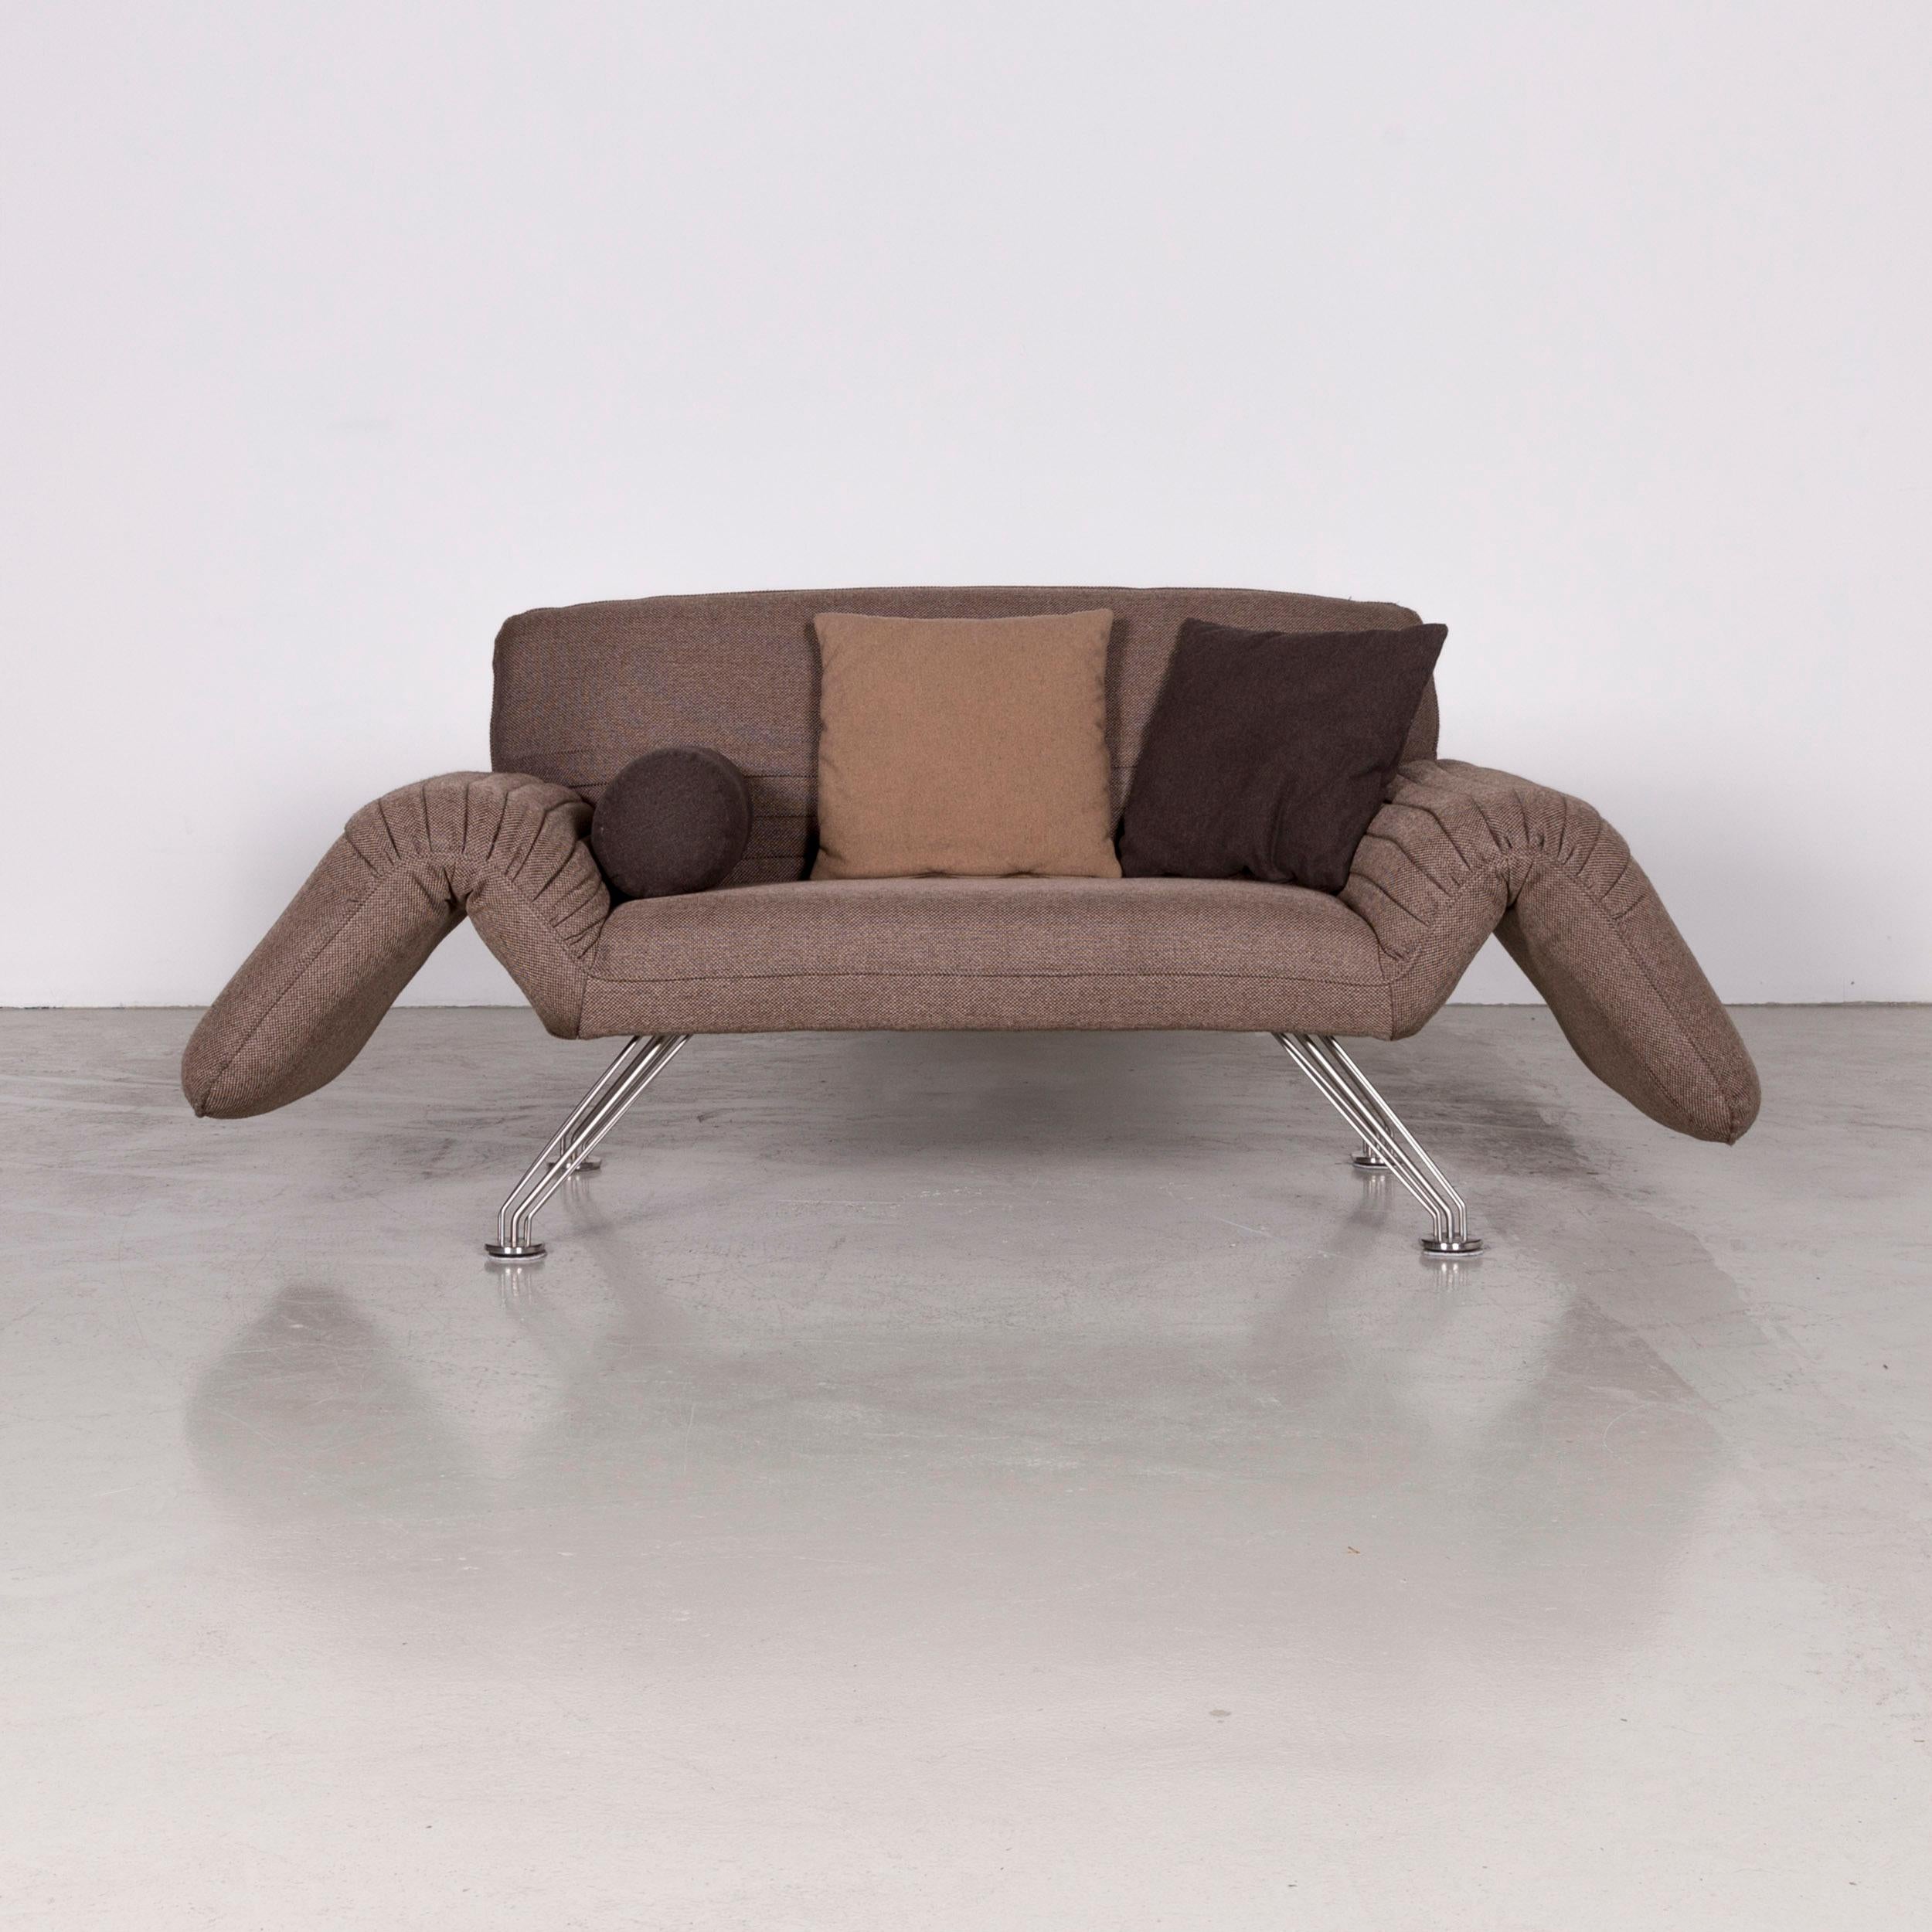 De Sede DS 142 Designer Fabric Sofa Brown Two-Seat Function Couch In Good Condition For Sale In Cologne, DE